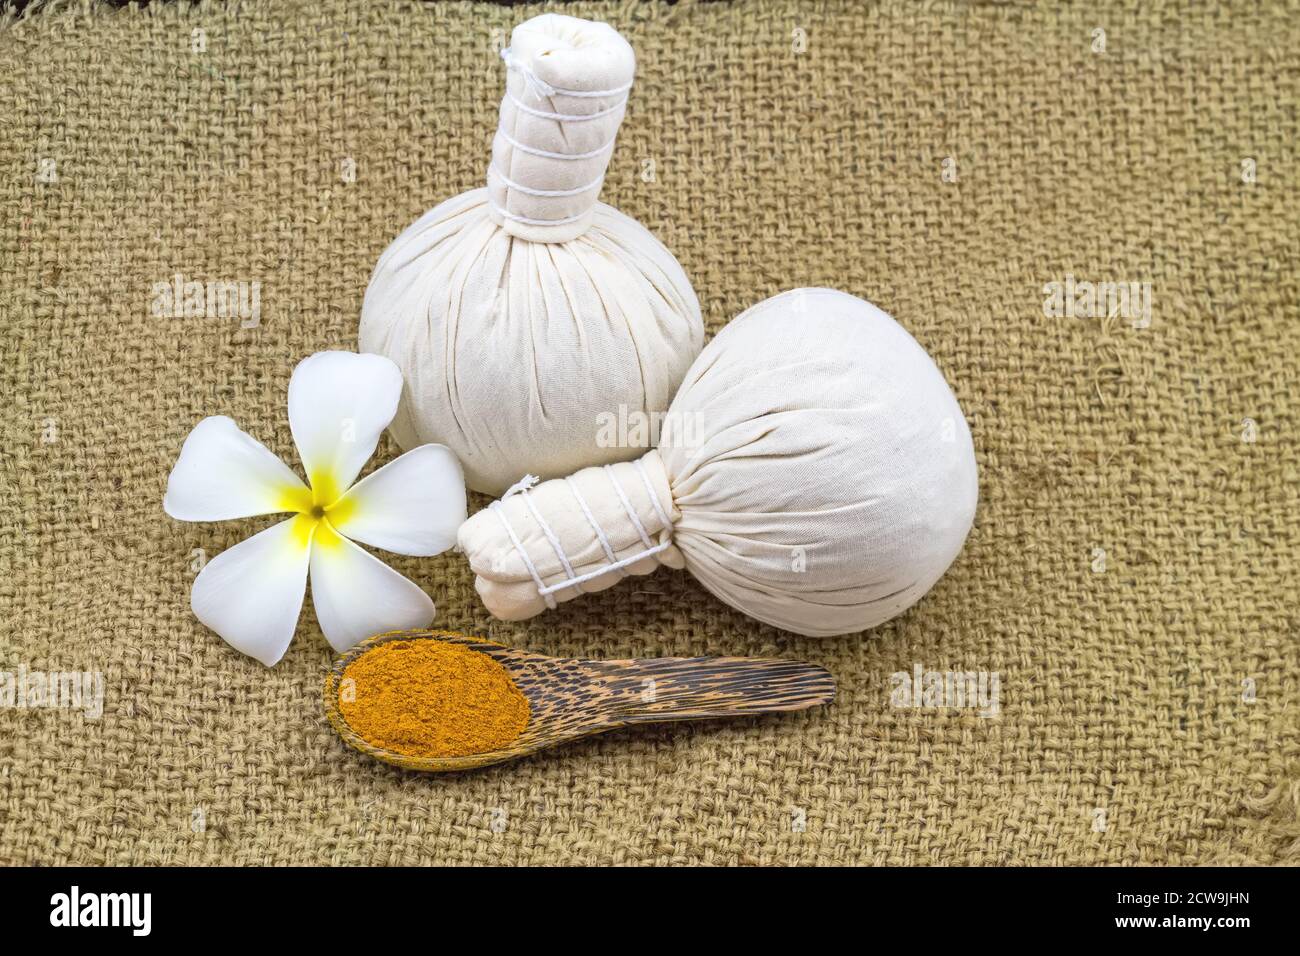 Spa herbal compressing ball , white frangipani flowers (Plumeria spp , Apocynaceae, Pagoda tree, Temple tree) and turmeric powder  in wooden spoon on Stock Photo